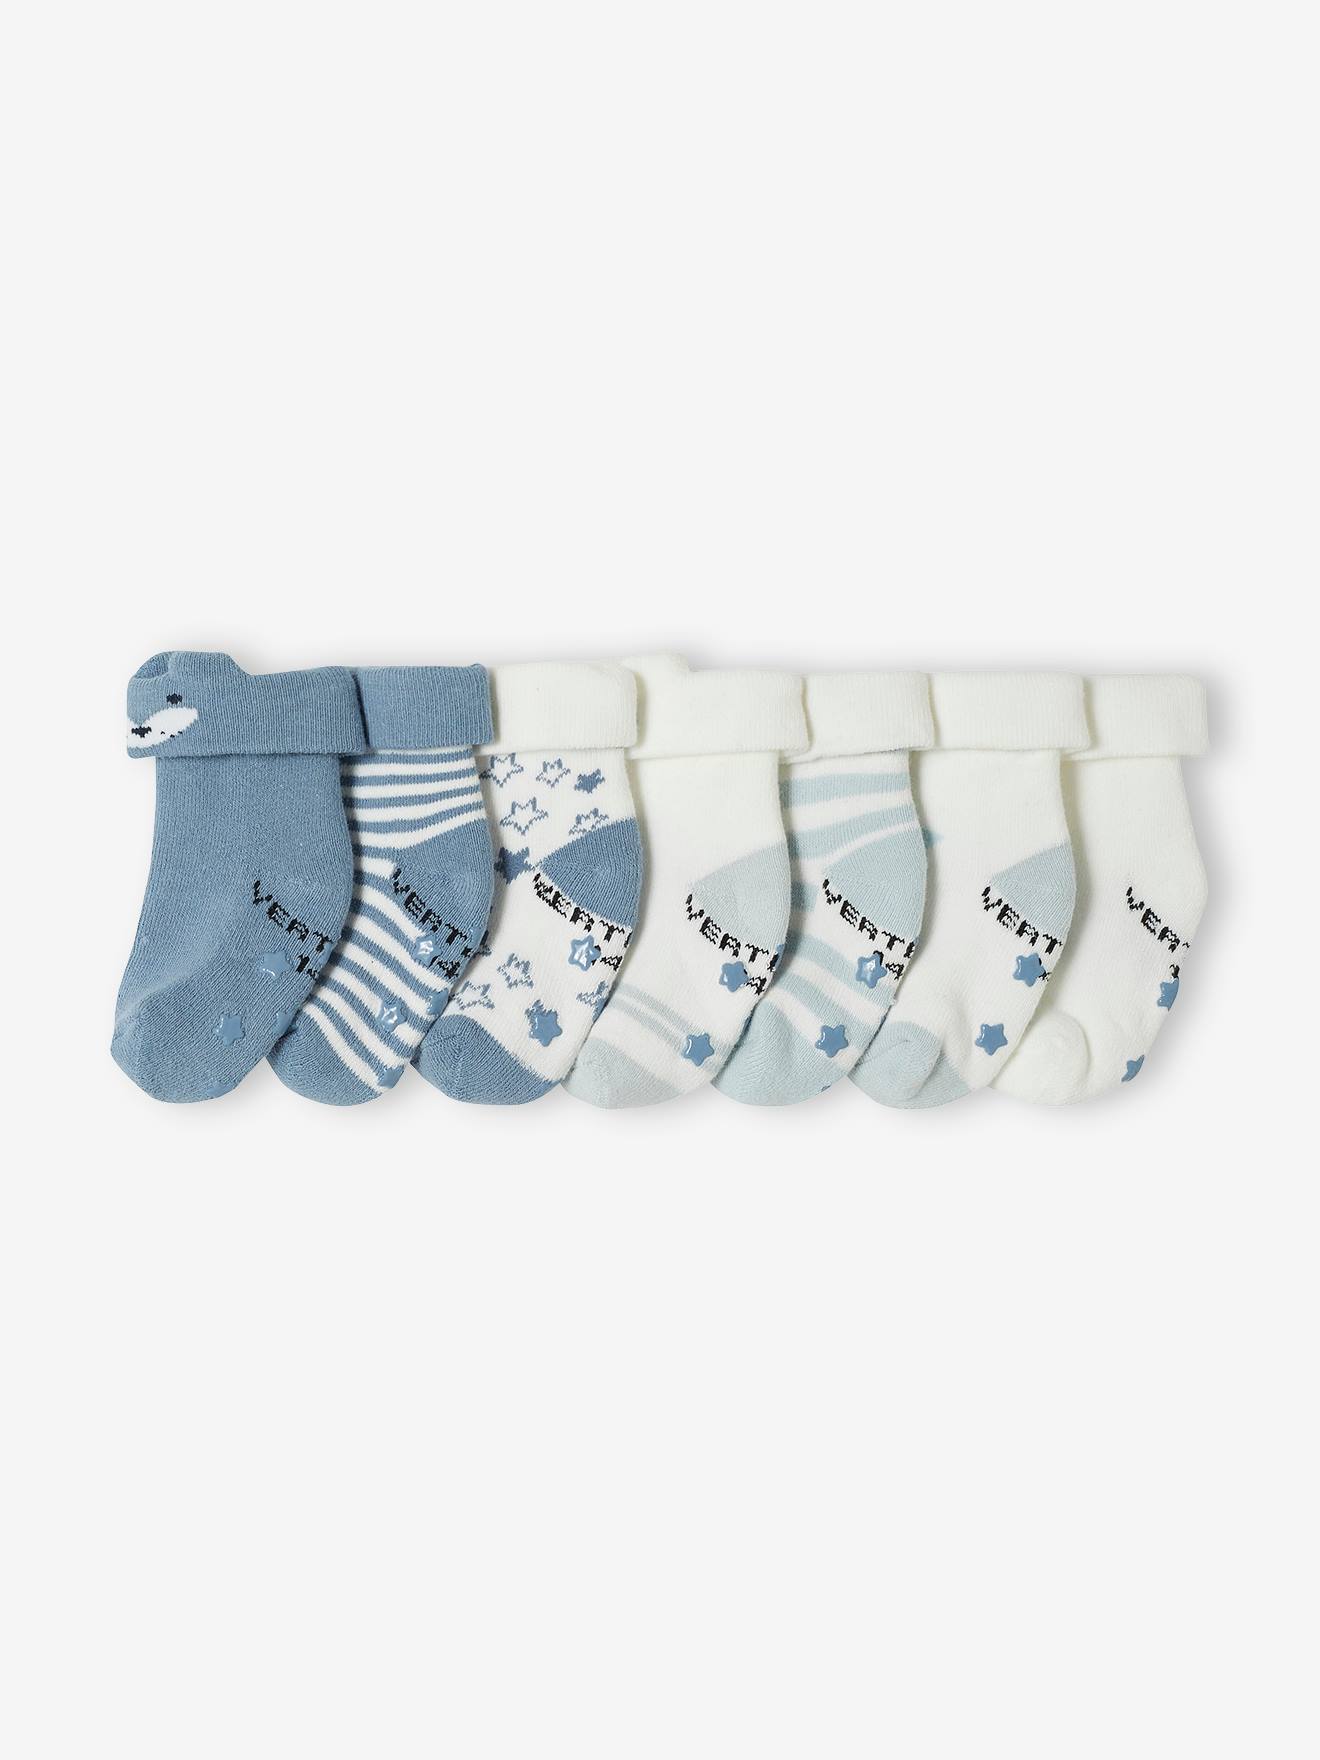 Pack of 7 pairs of "Stars & Fox" Socks for Babies blue